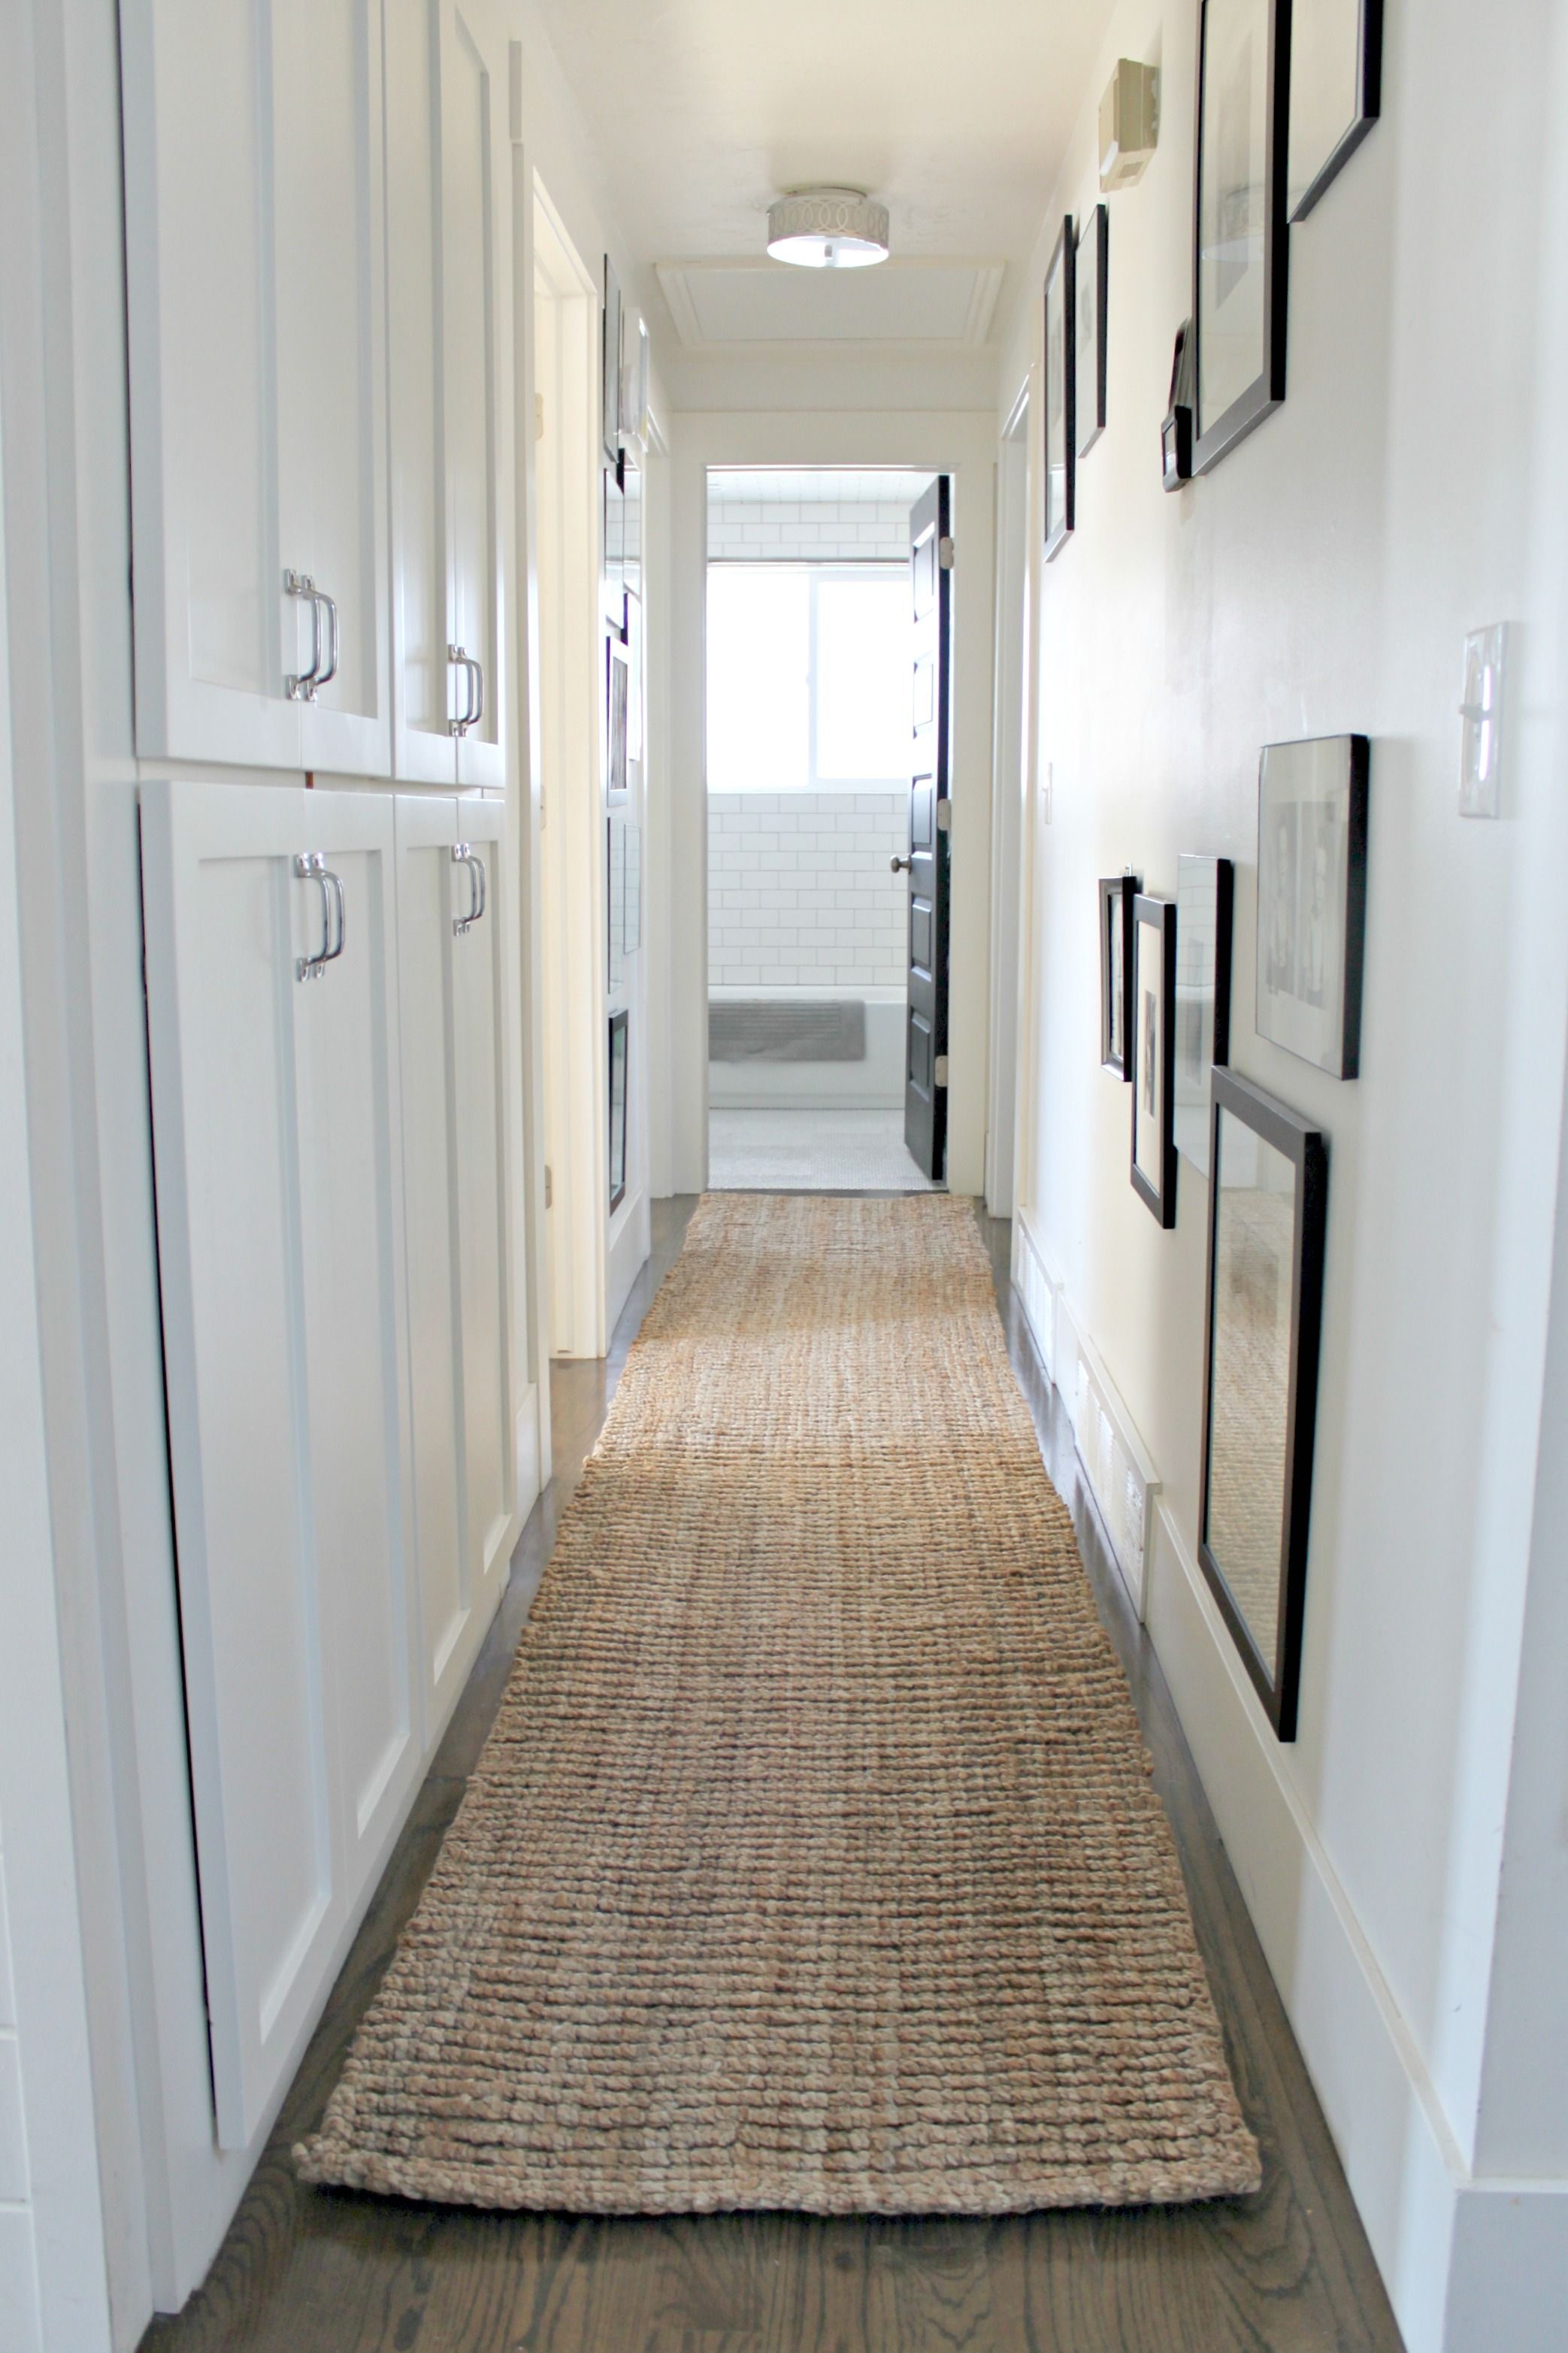 New Hallway Rug Intended For Hallway Carpet Runners (View 11 of 20)